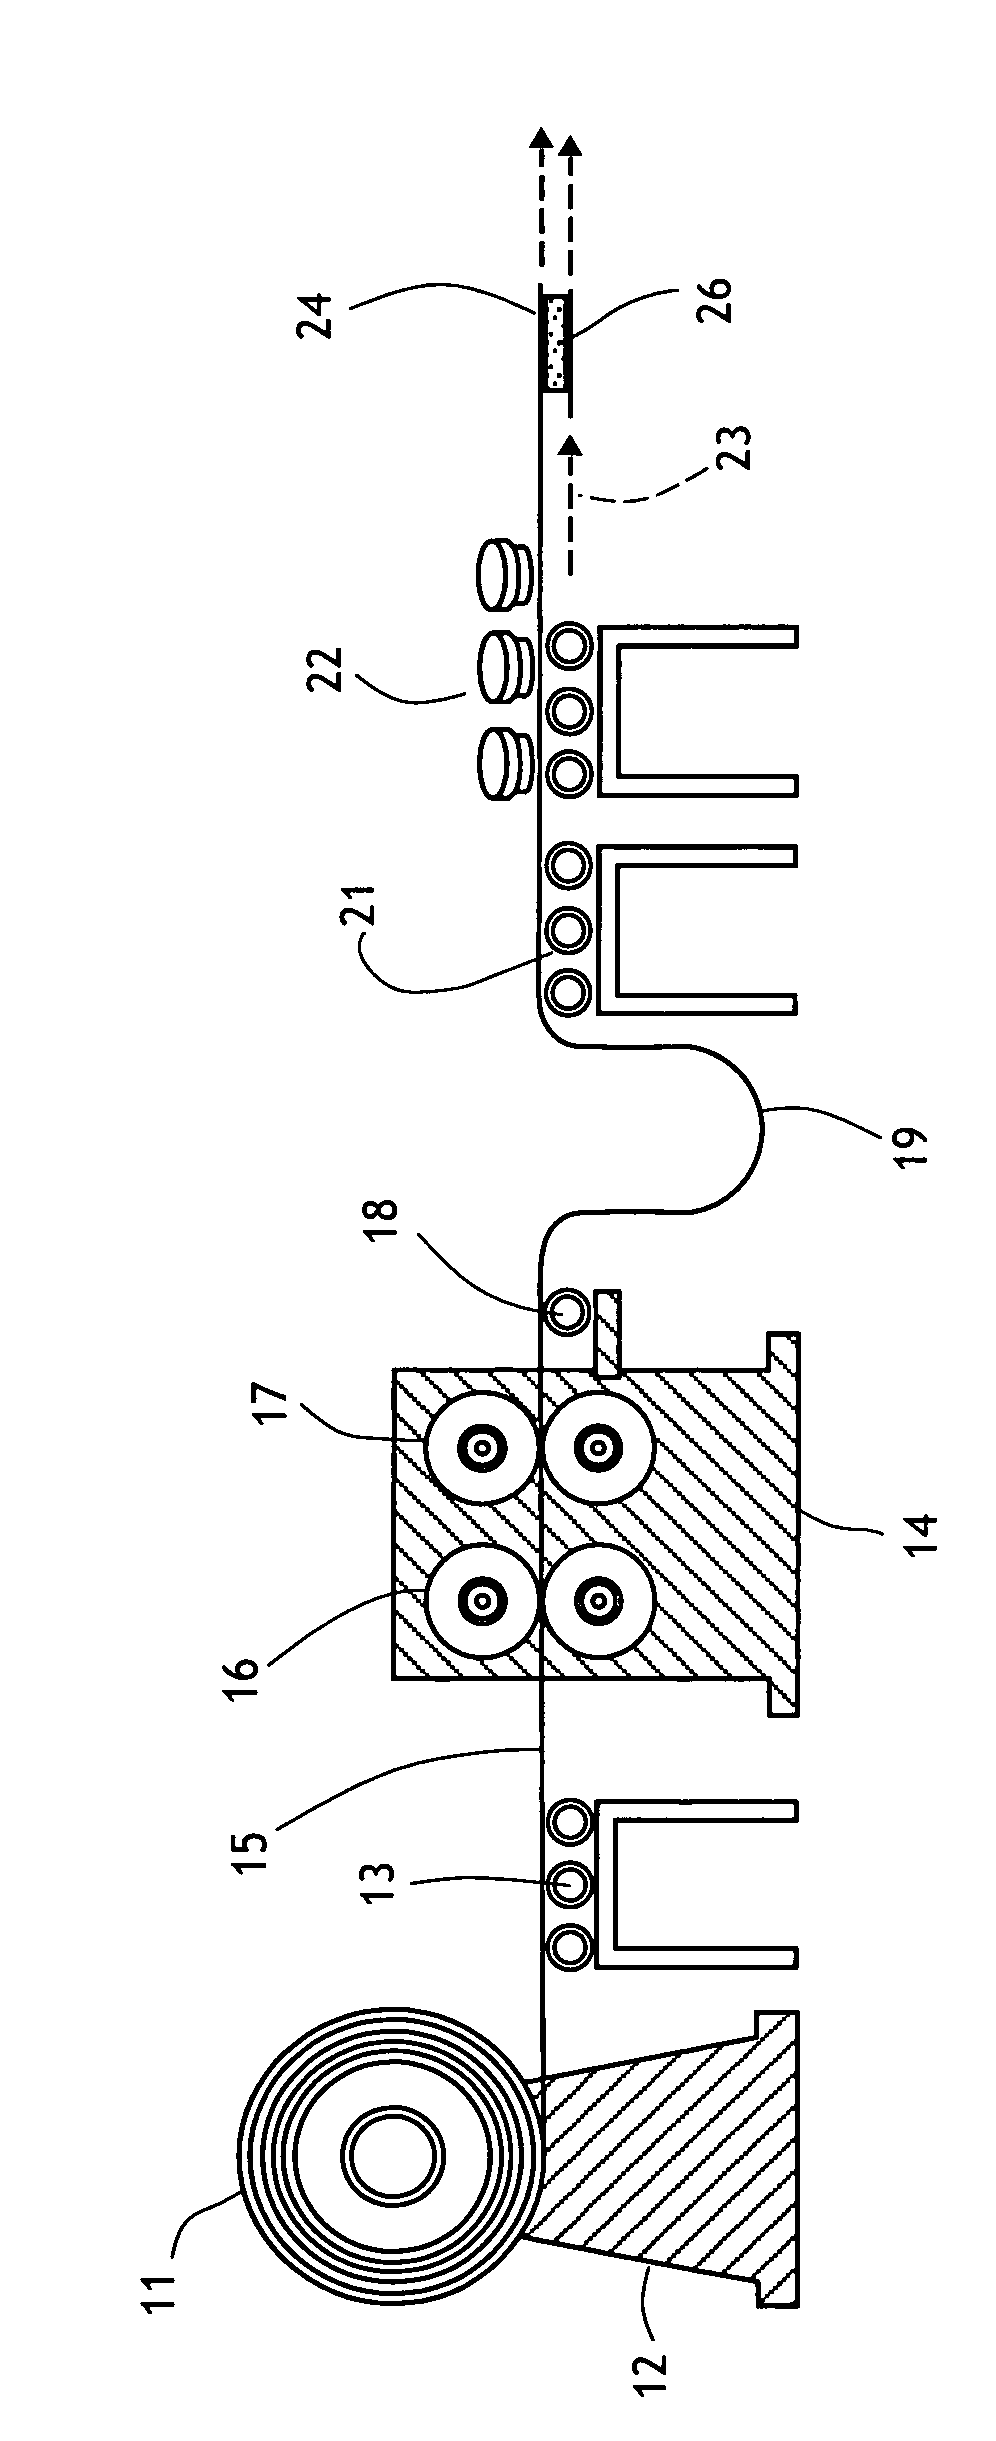 Method and apparatus for exterior surface treatment of insulated structural steel panels